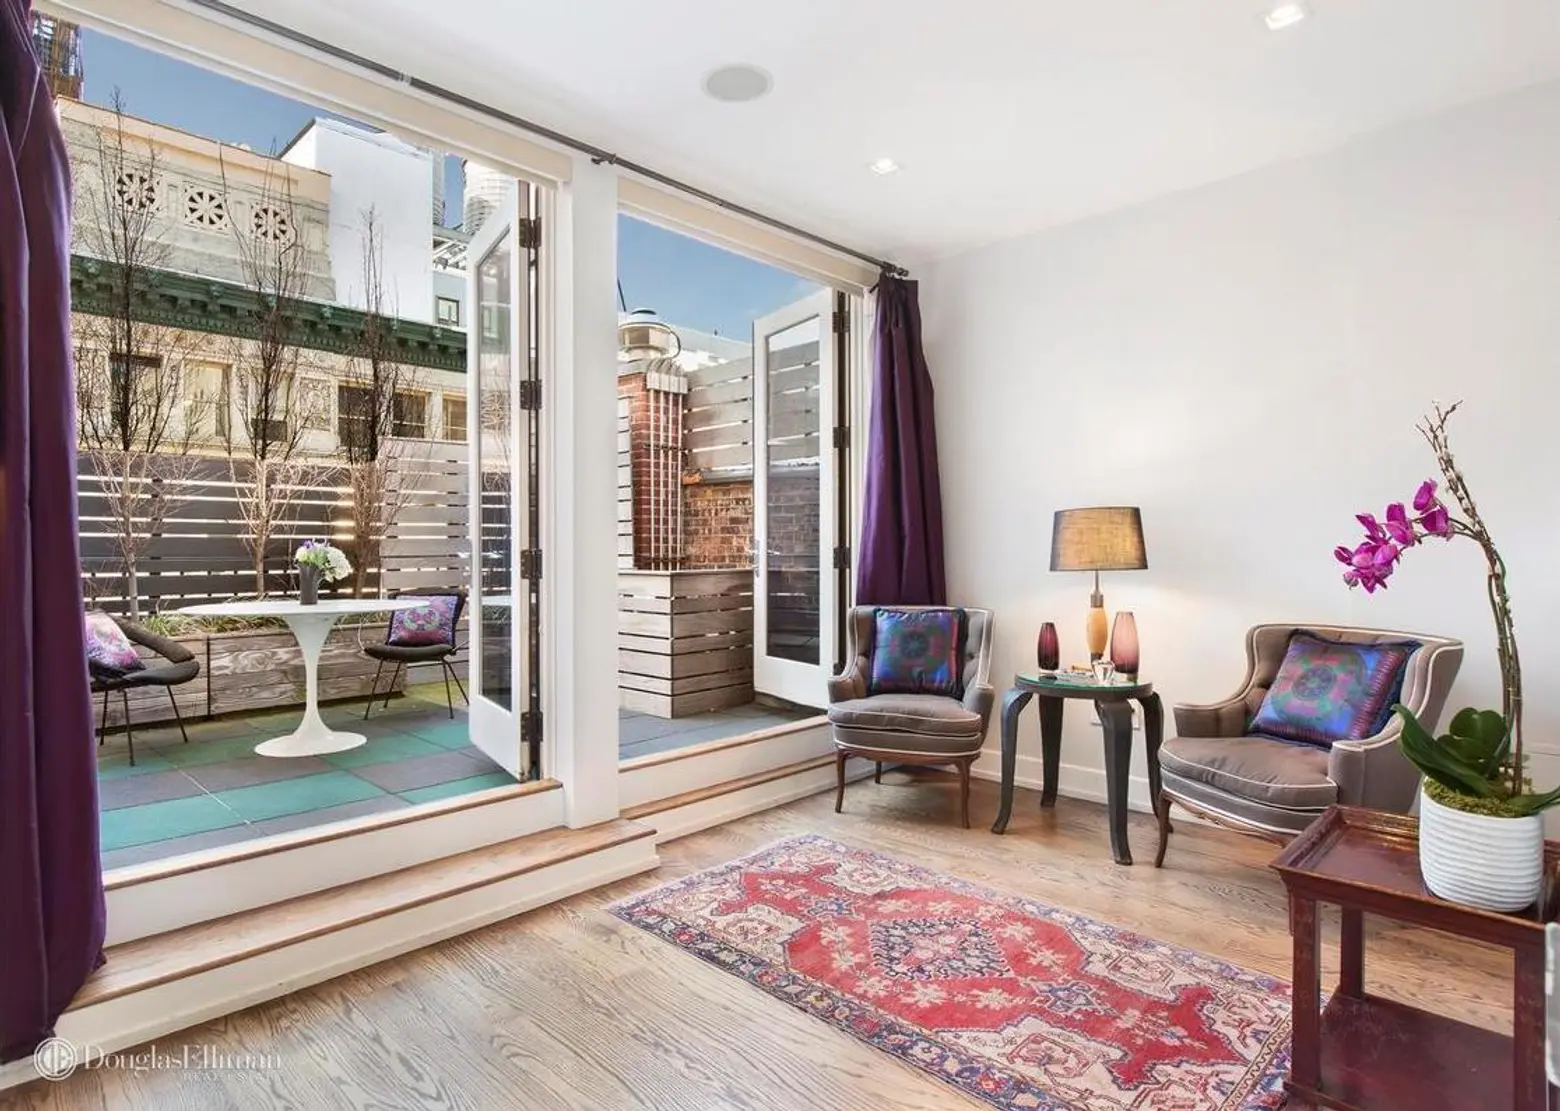 29 West 19th Street, Chelsea, Penthouses, outdoor spaces